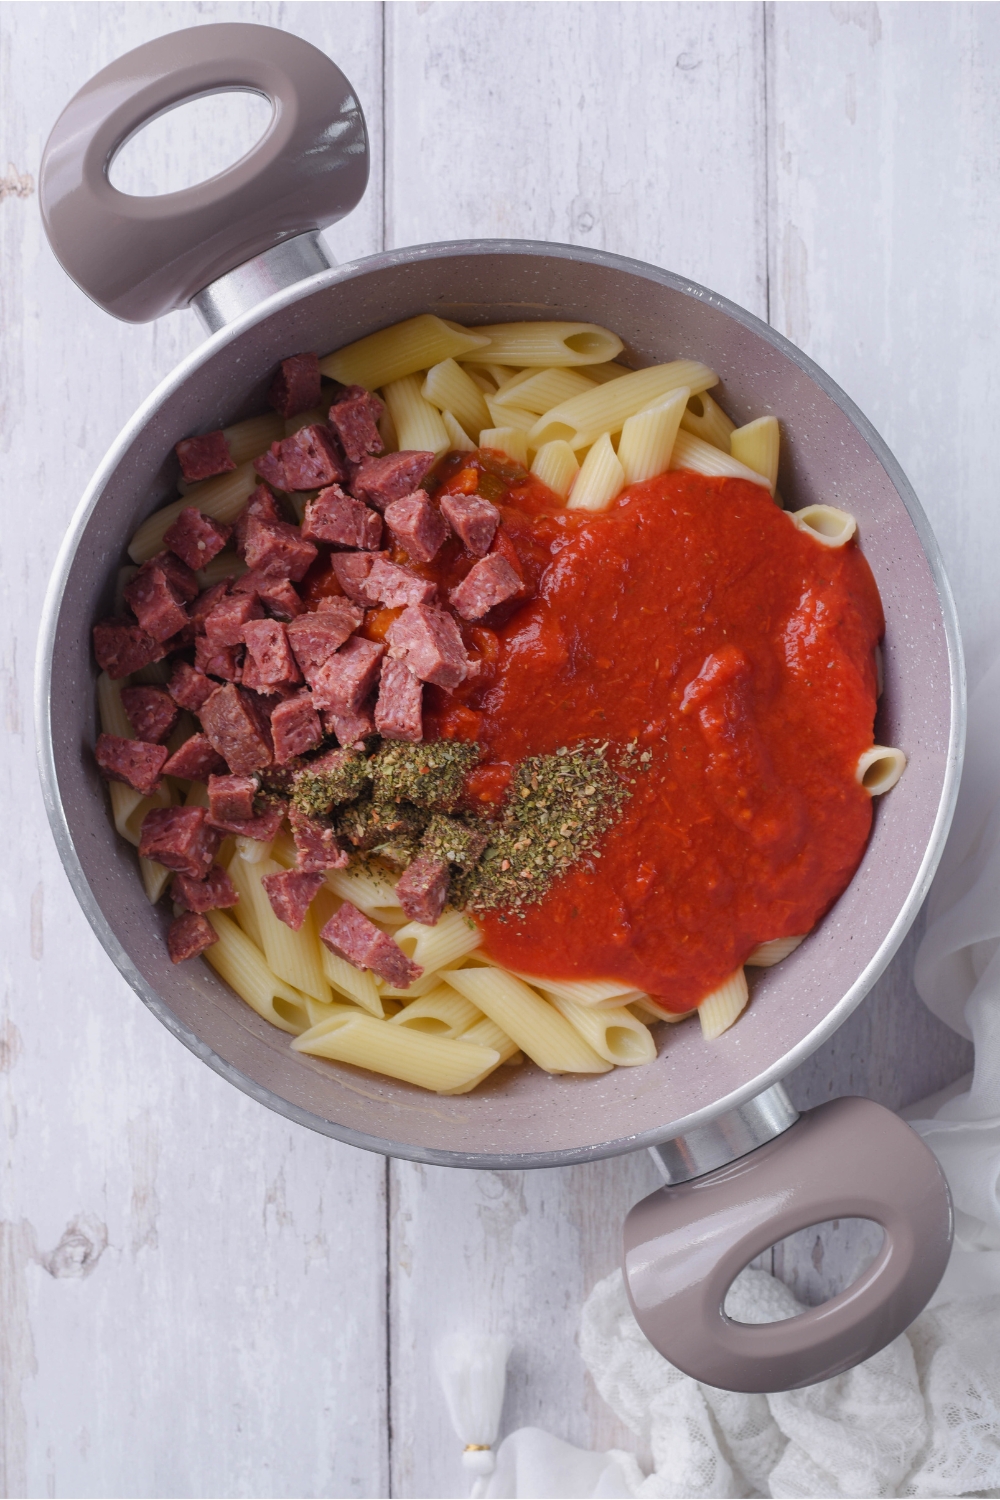 A grey pot filled with cooked penne pasta, red sauce, diced pepperoni, and spices that have been added but are not yet combined.